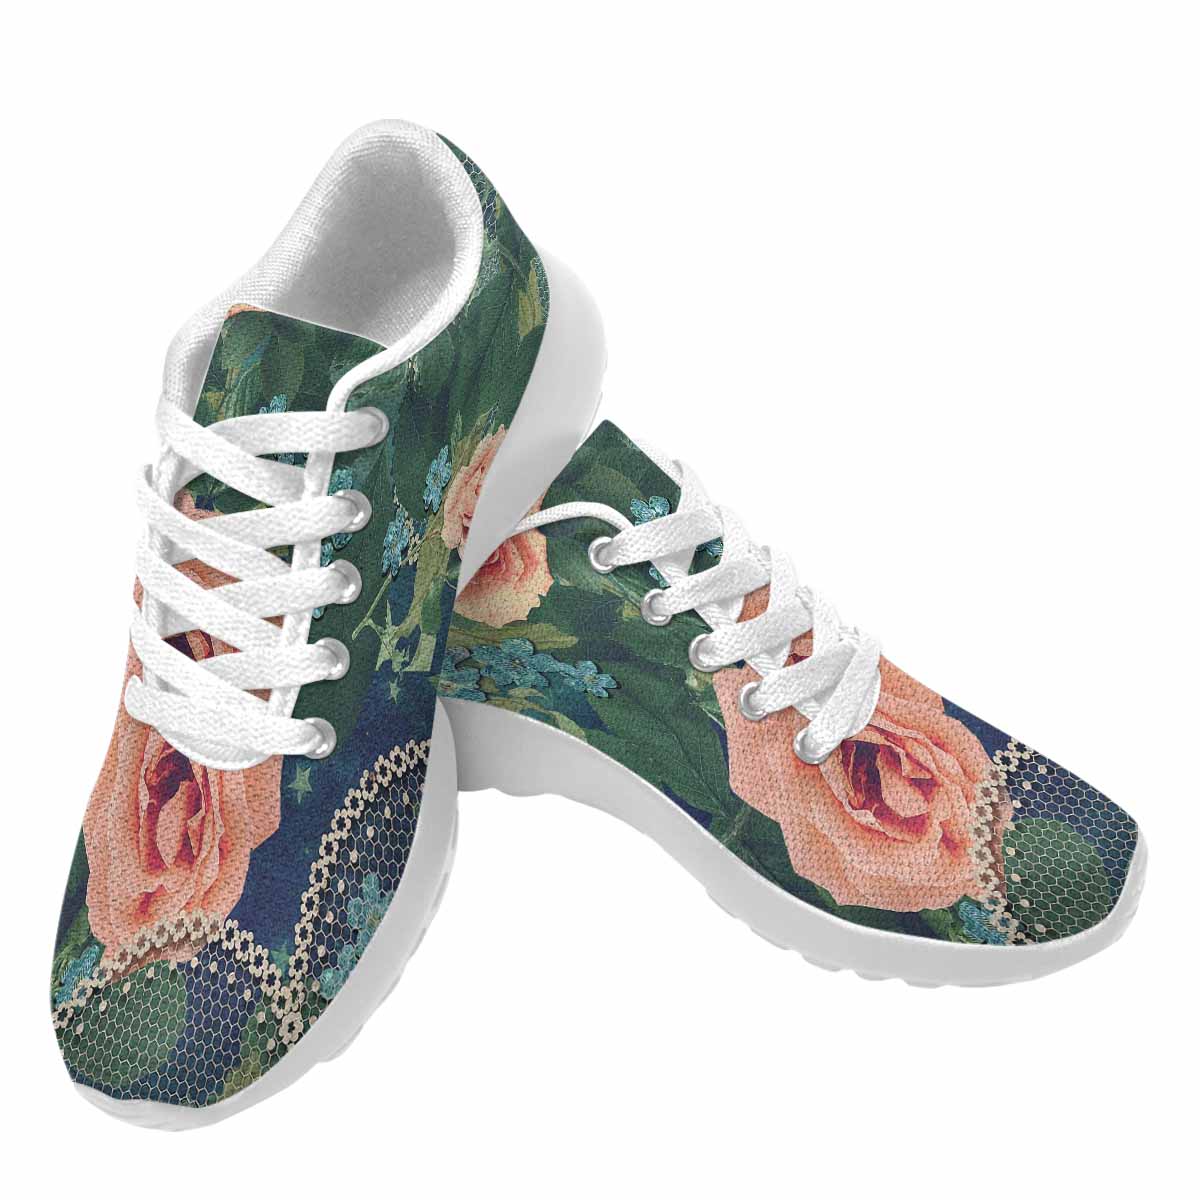 Victorian lace print, womens cute casual or running sneakers, shoes, design 01